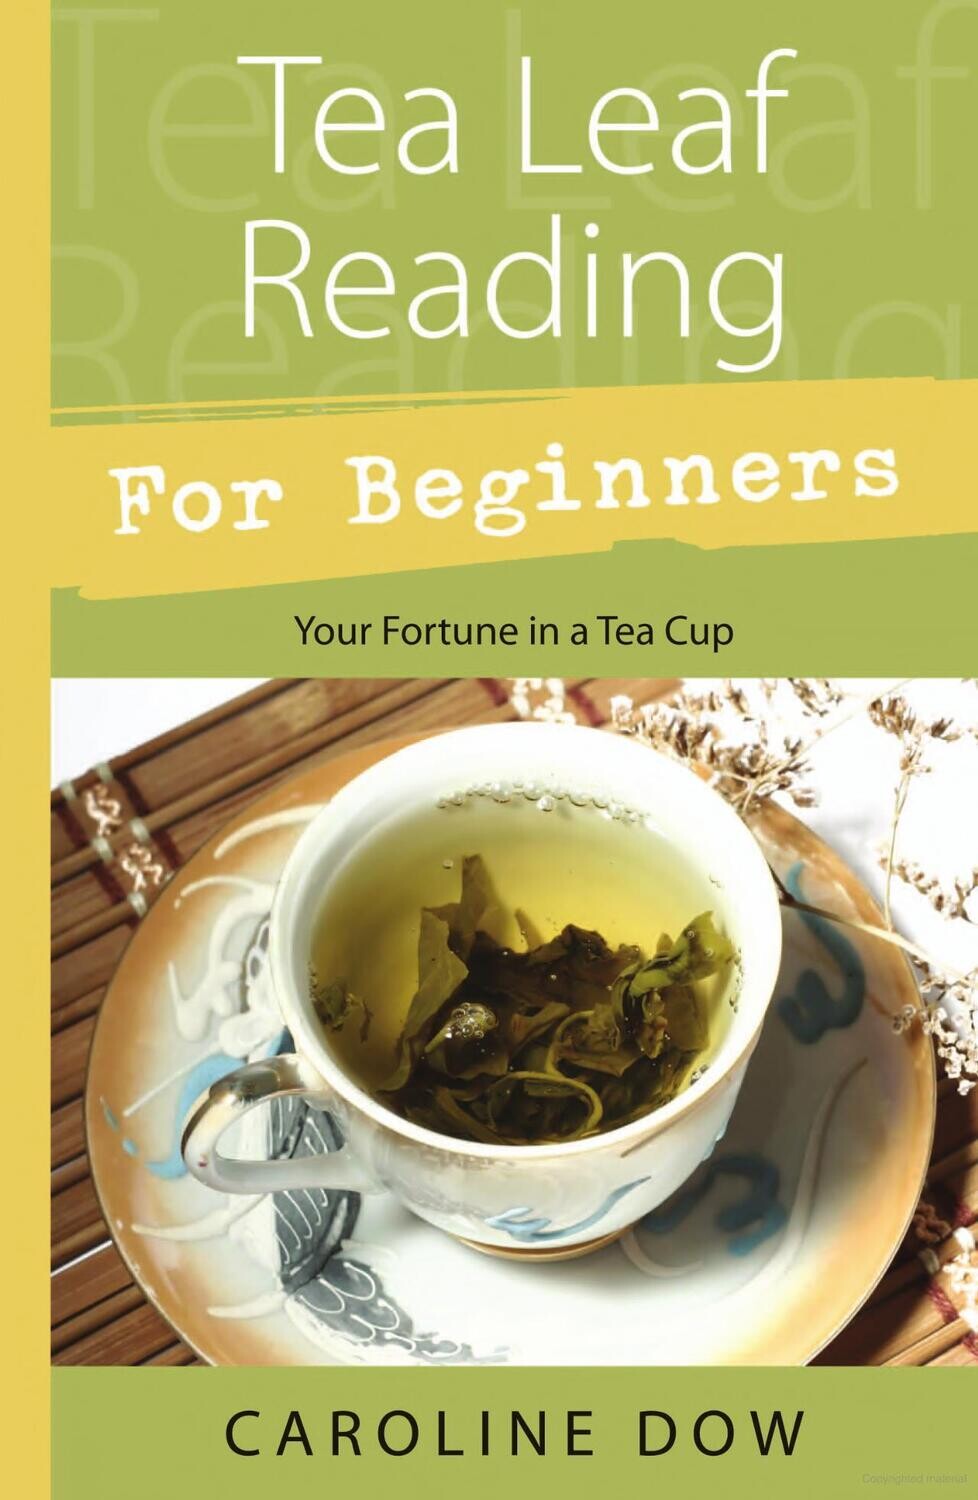 Tea Leaf Reading for Beginners:
Your Fortune in a Teacup by Caroline Dow